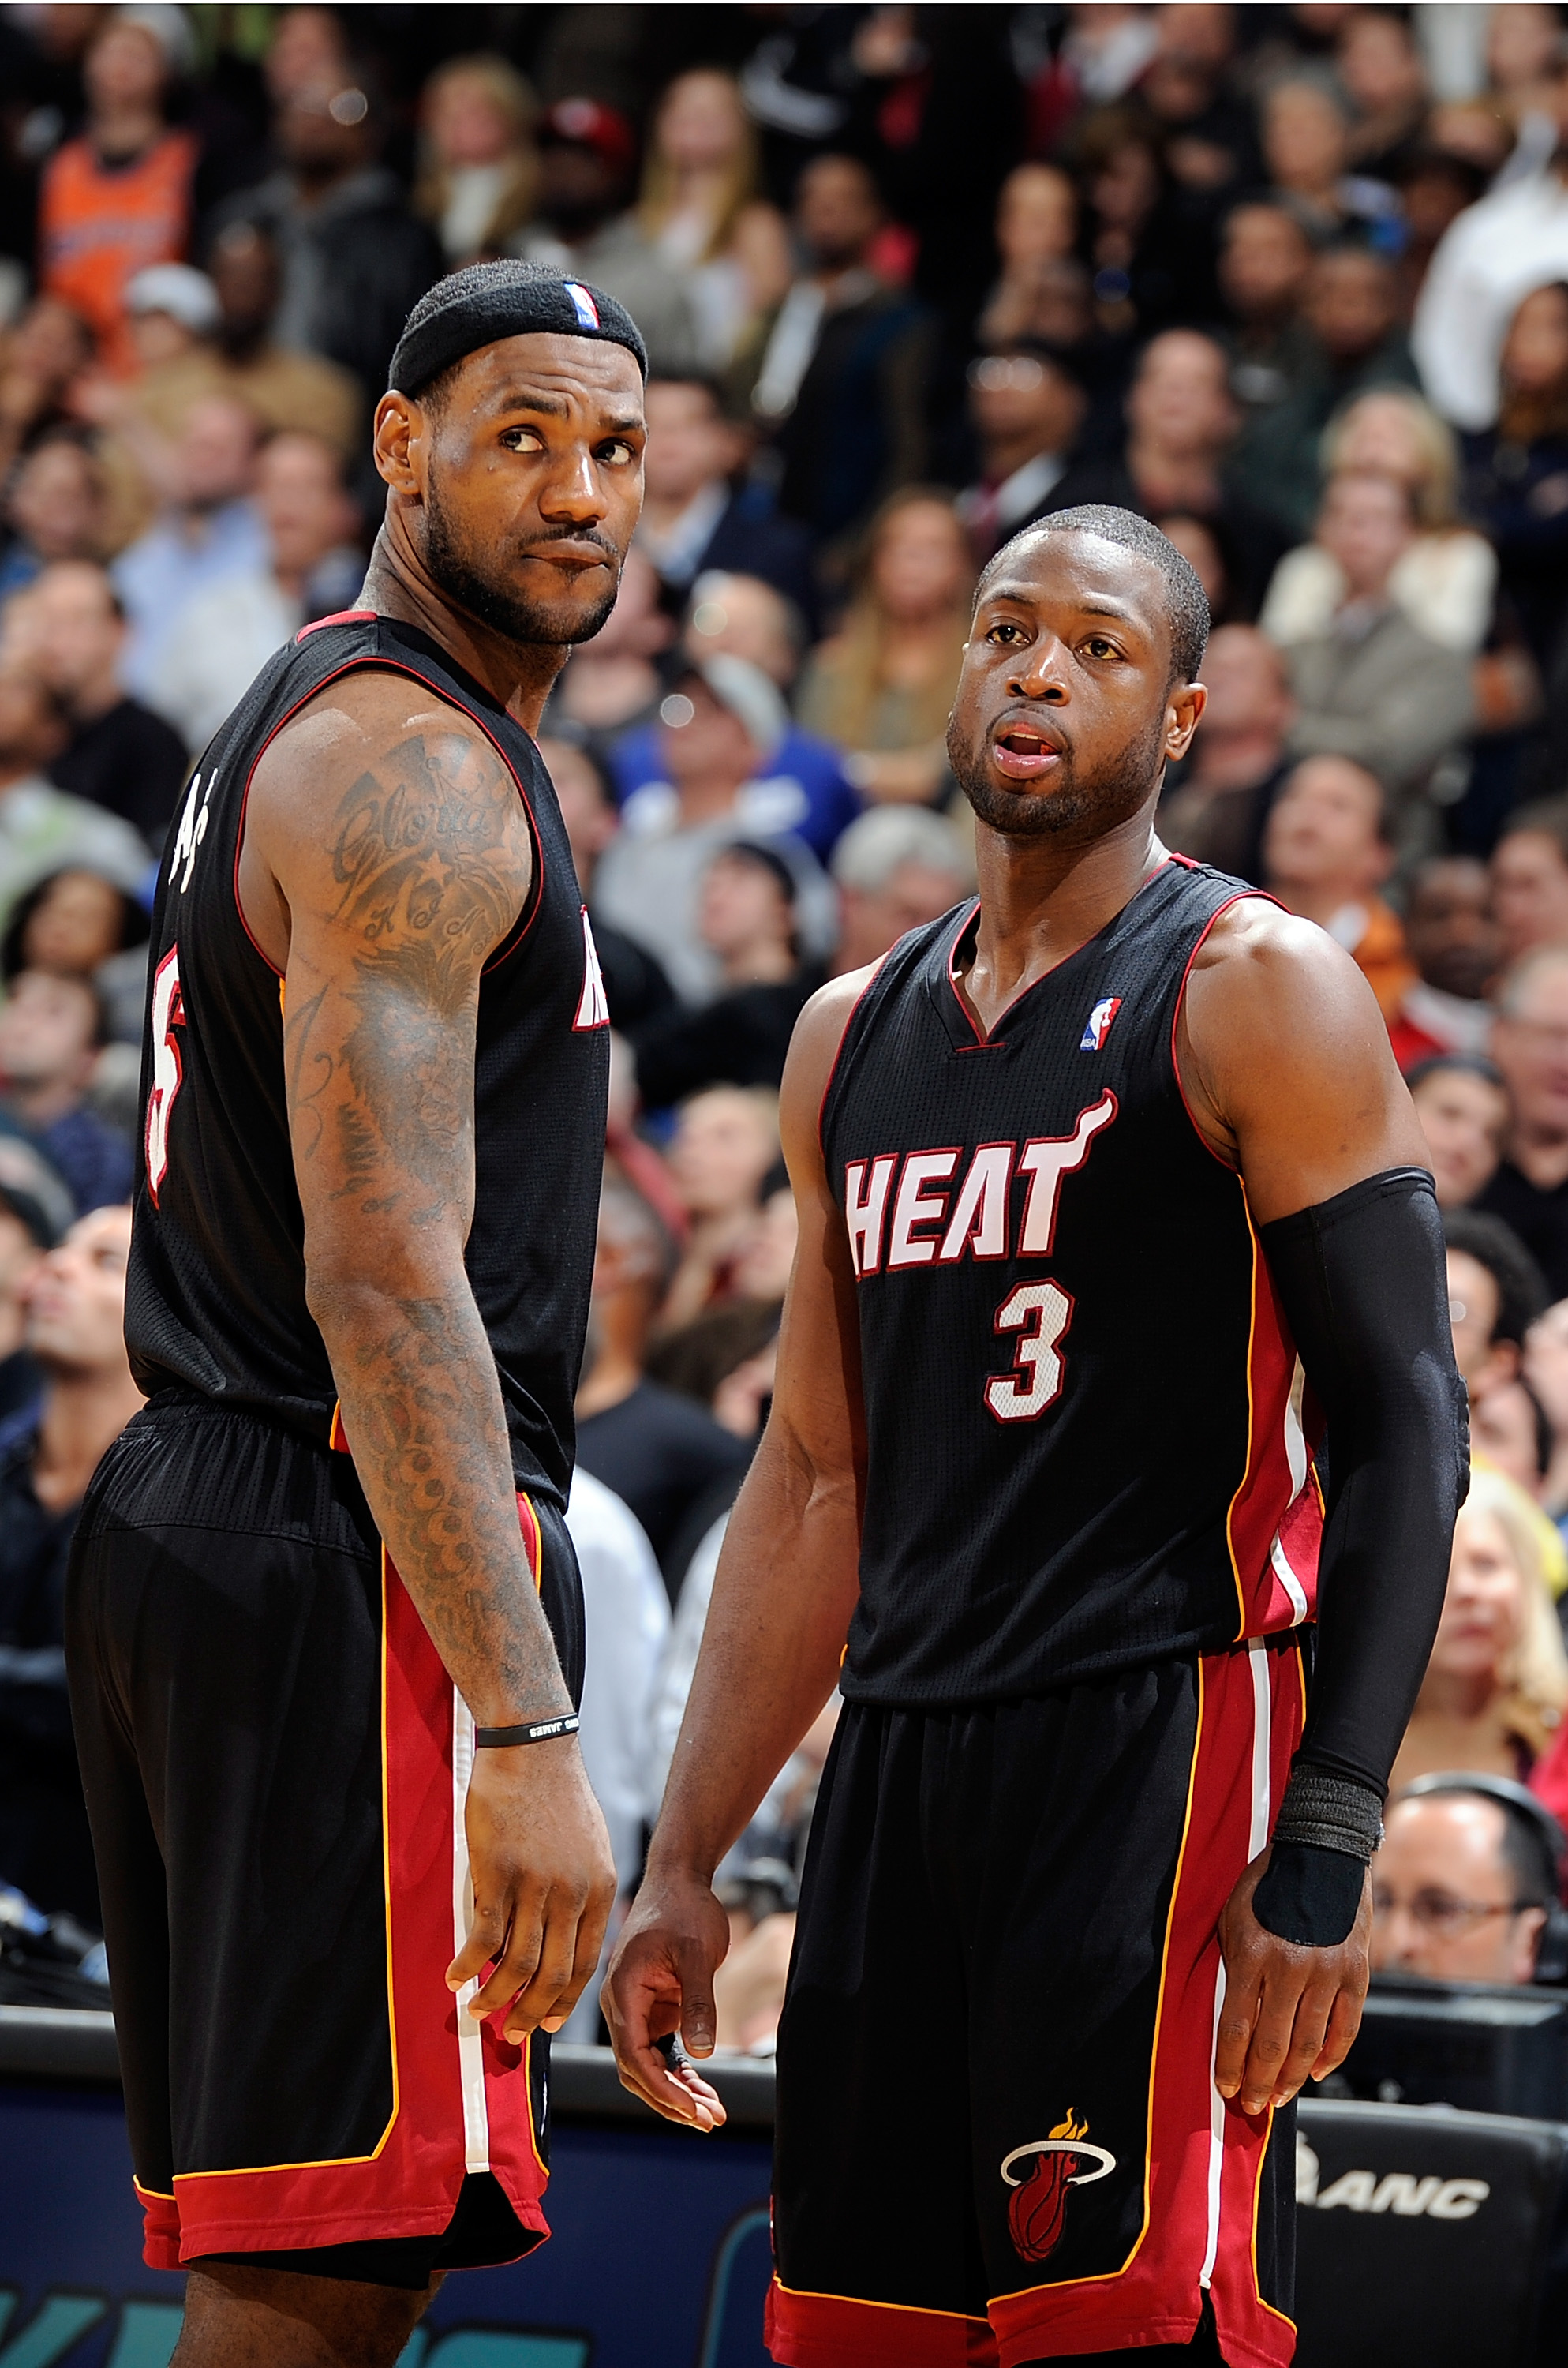 WASHINGTON, DC - DECEMBER 18:  LeBron James #6 of the Miami Heat talks with Dwyane Wade #3 during the game against the Washington Wizards at the Verizon Center on December 18, 2010 in Washington, DC. NOTE TO USER: User expressly acknowledges and agrees th